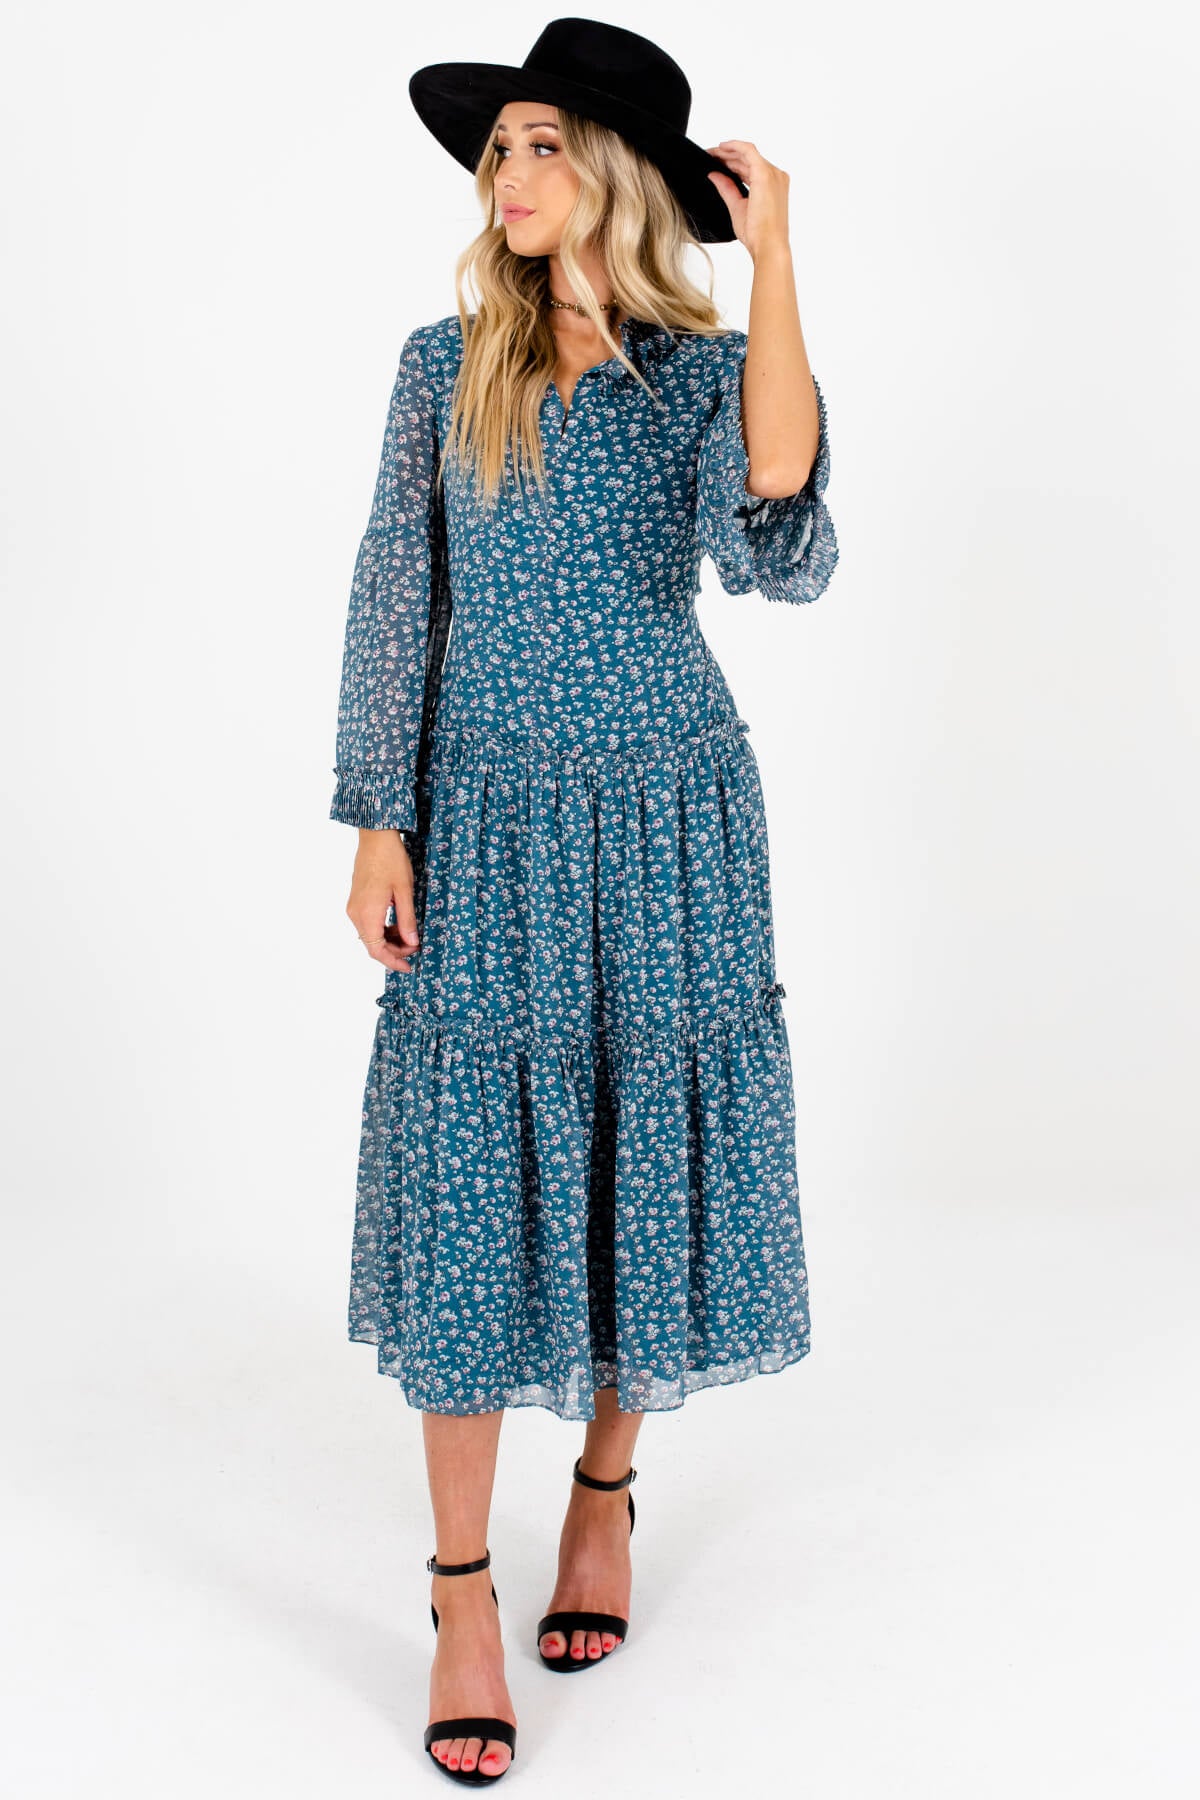 Teal Ditsy Floral Print Flowy Peasant Midi Dresses for Women